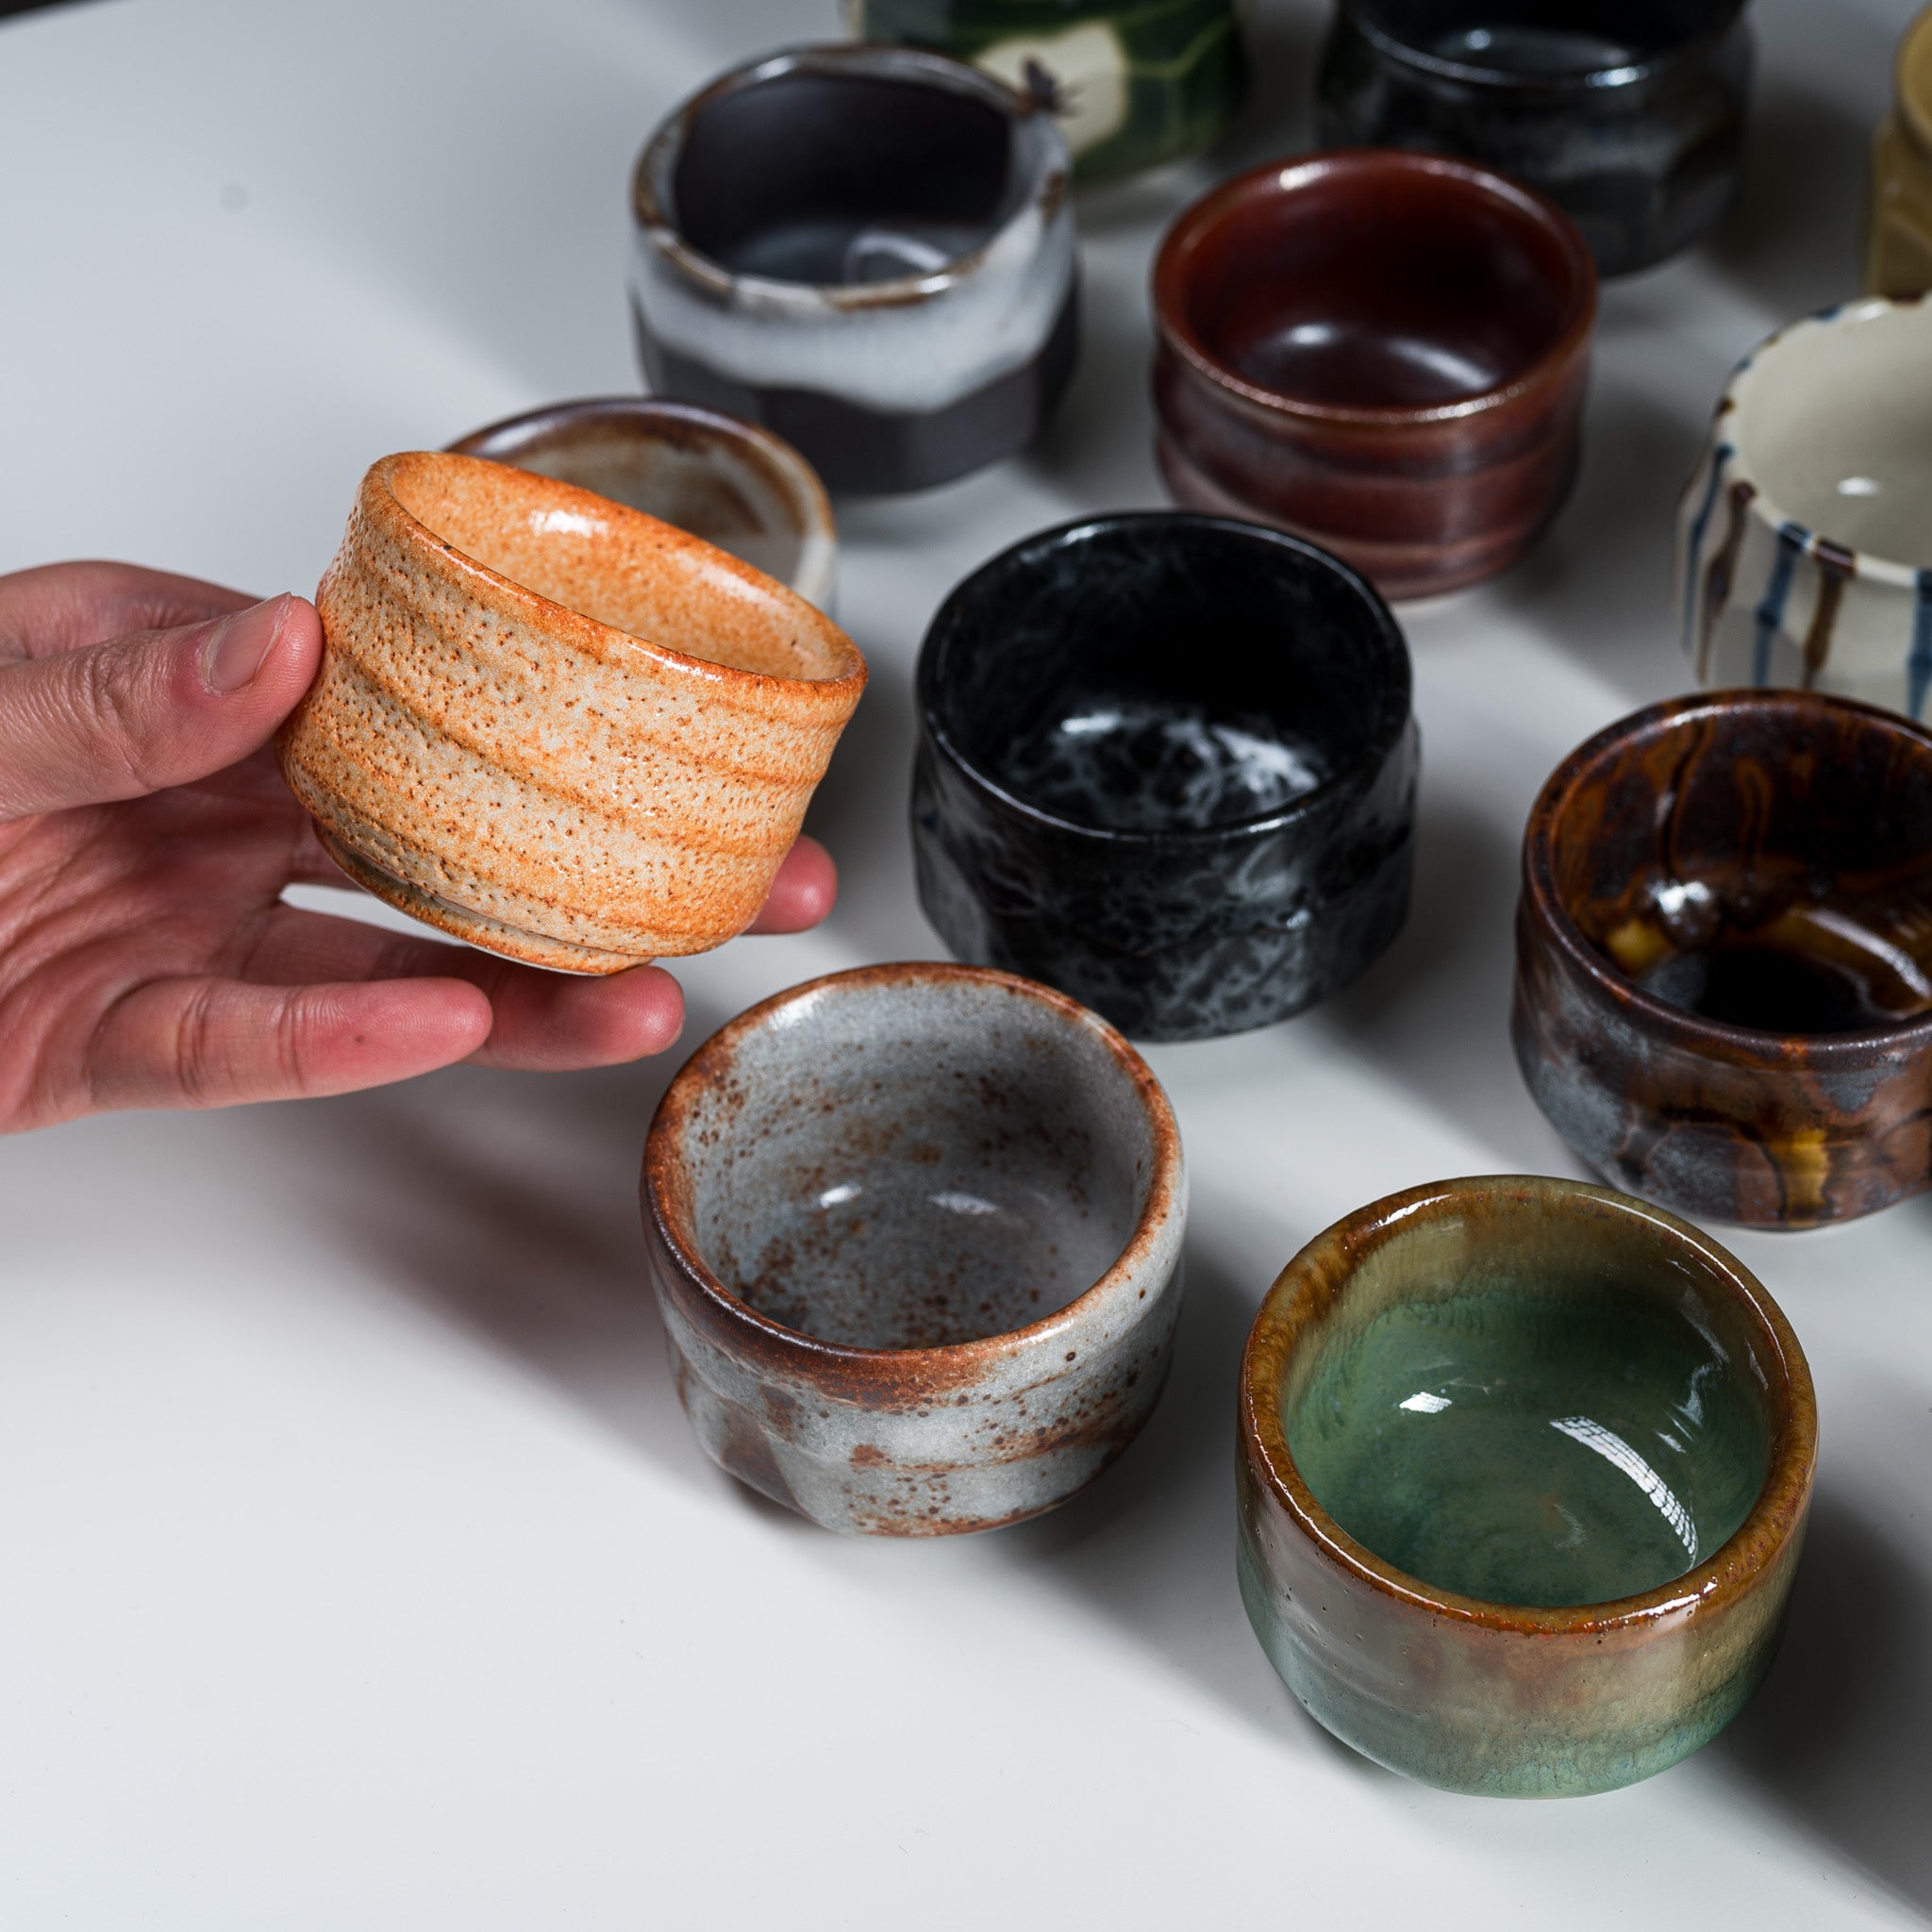 Mino ware Pottery Sake Cup / Teacup - Xquisite Ivory / 美濃焼き ぐい呑み